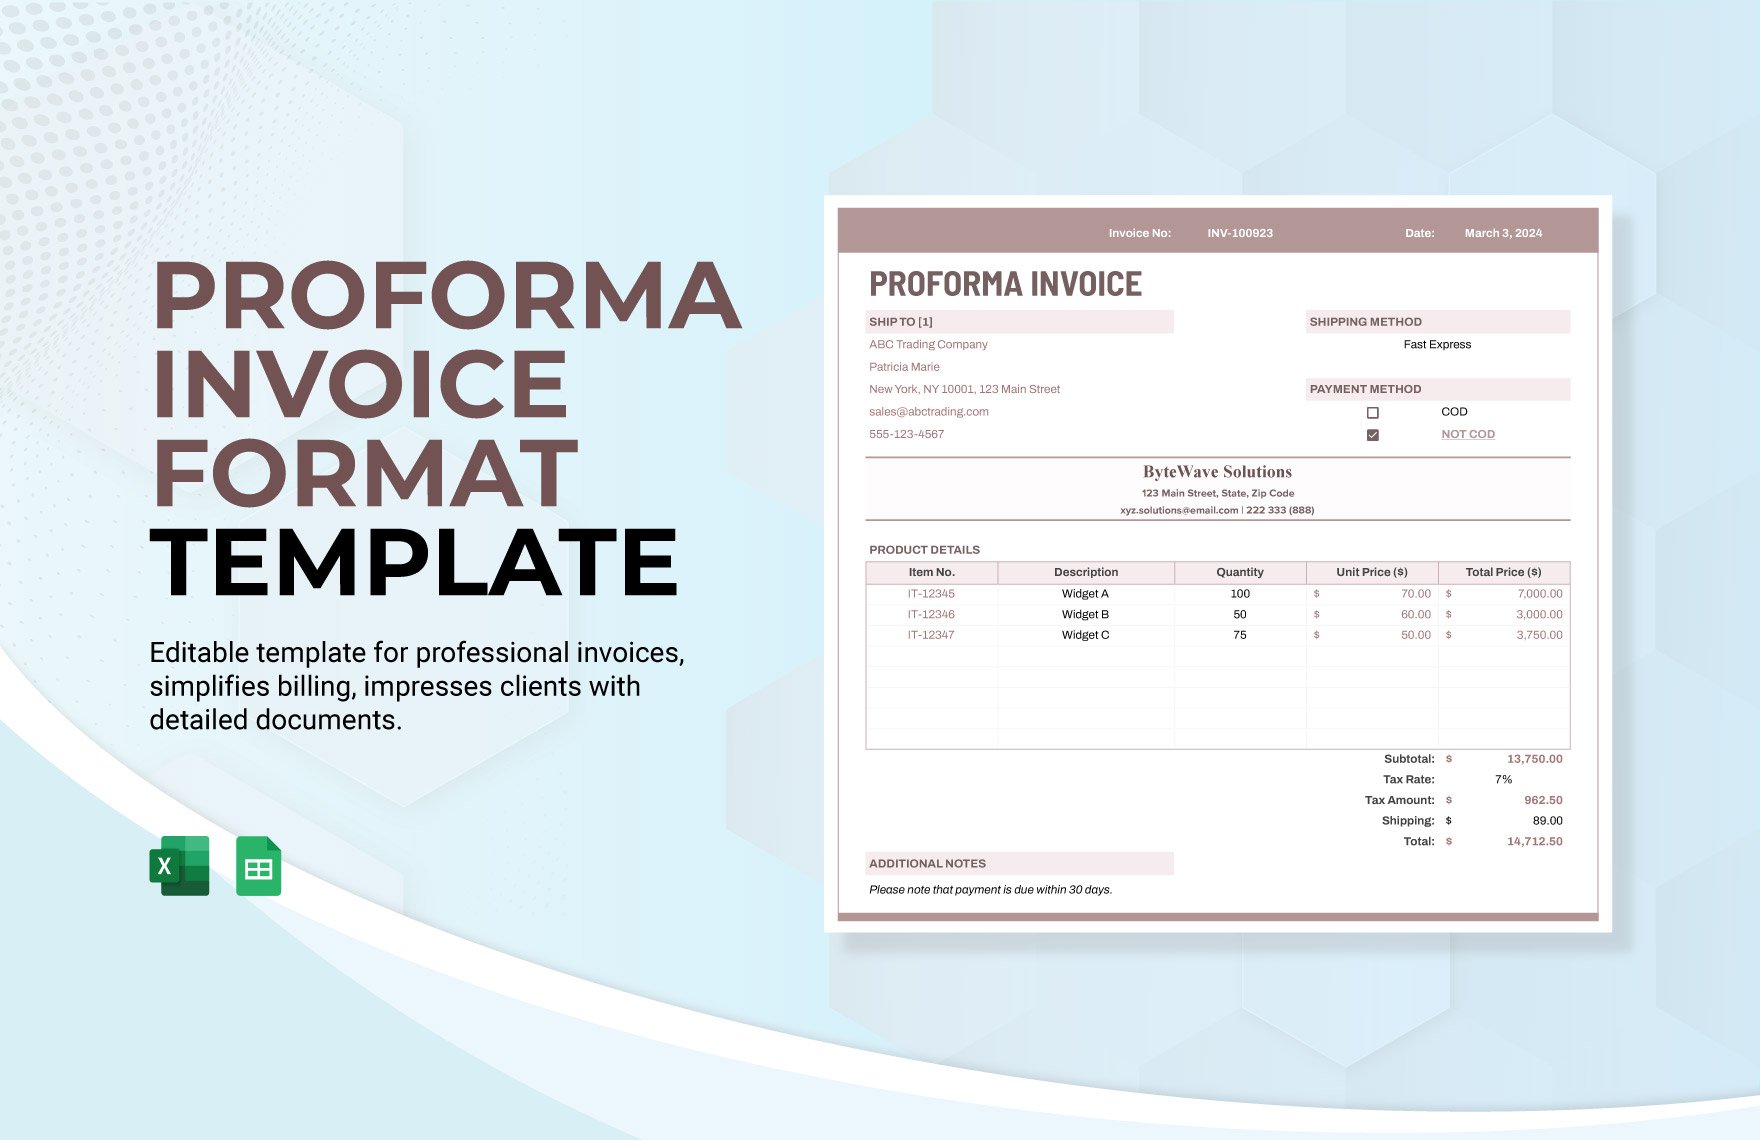 Proforma Invoice Format Template in Excel, Google Sheets